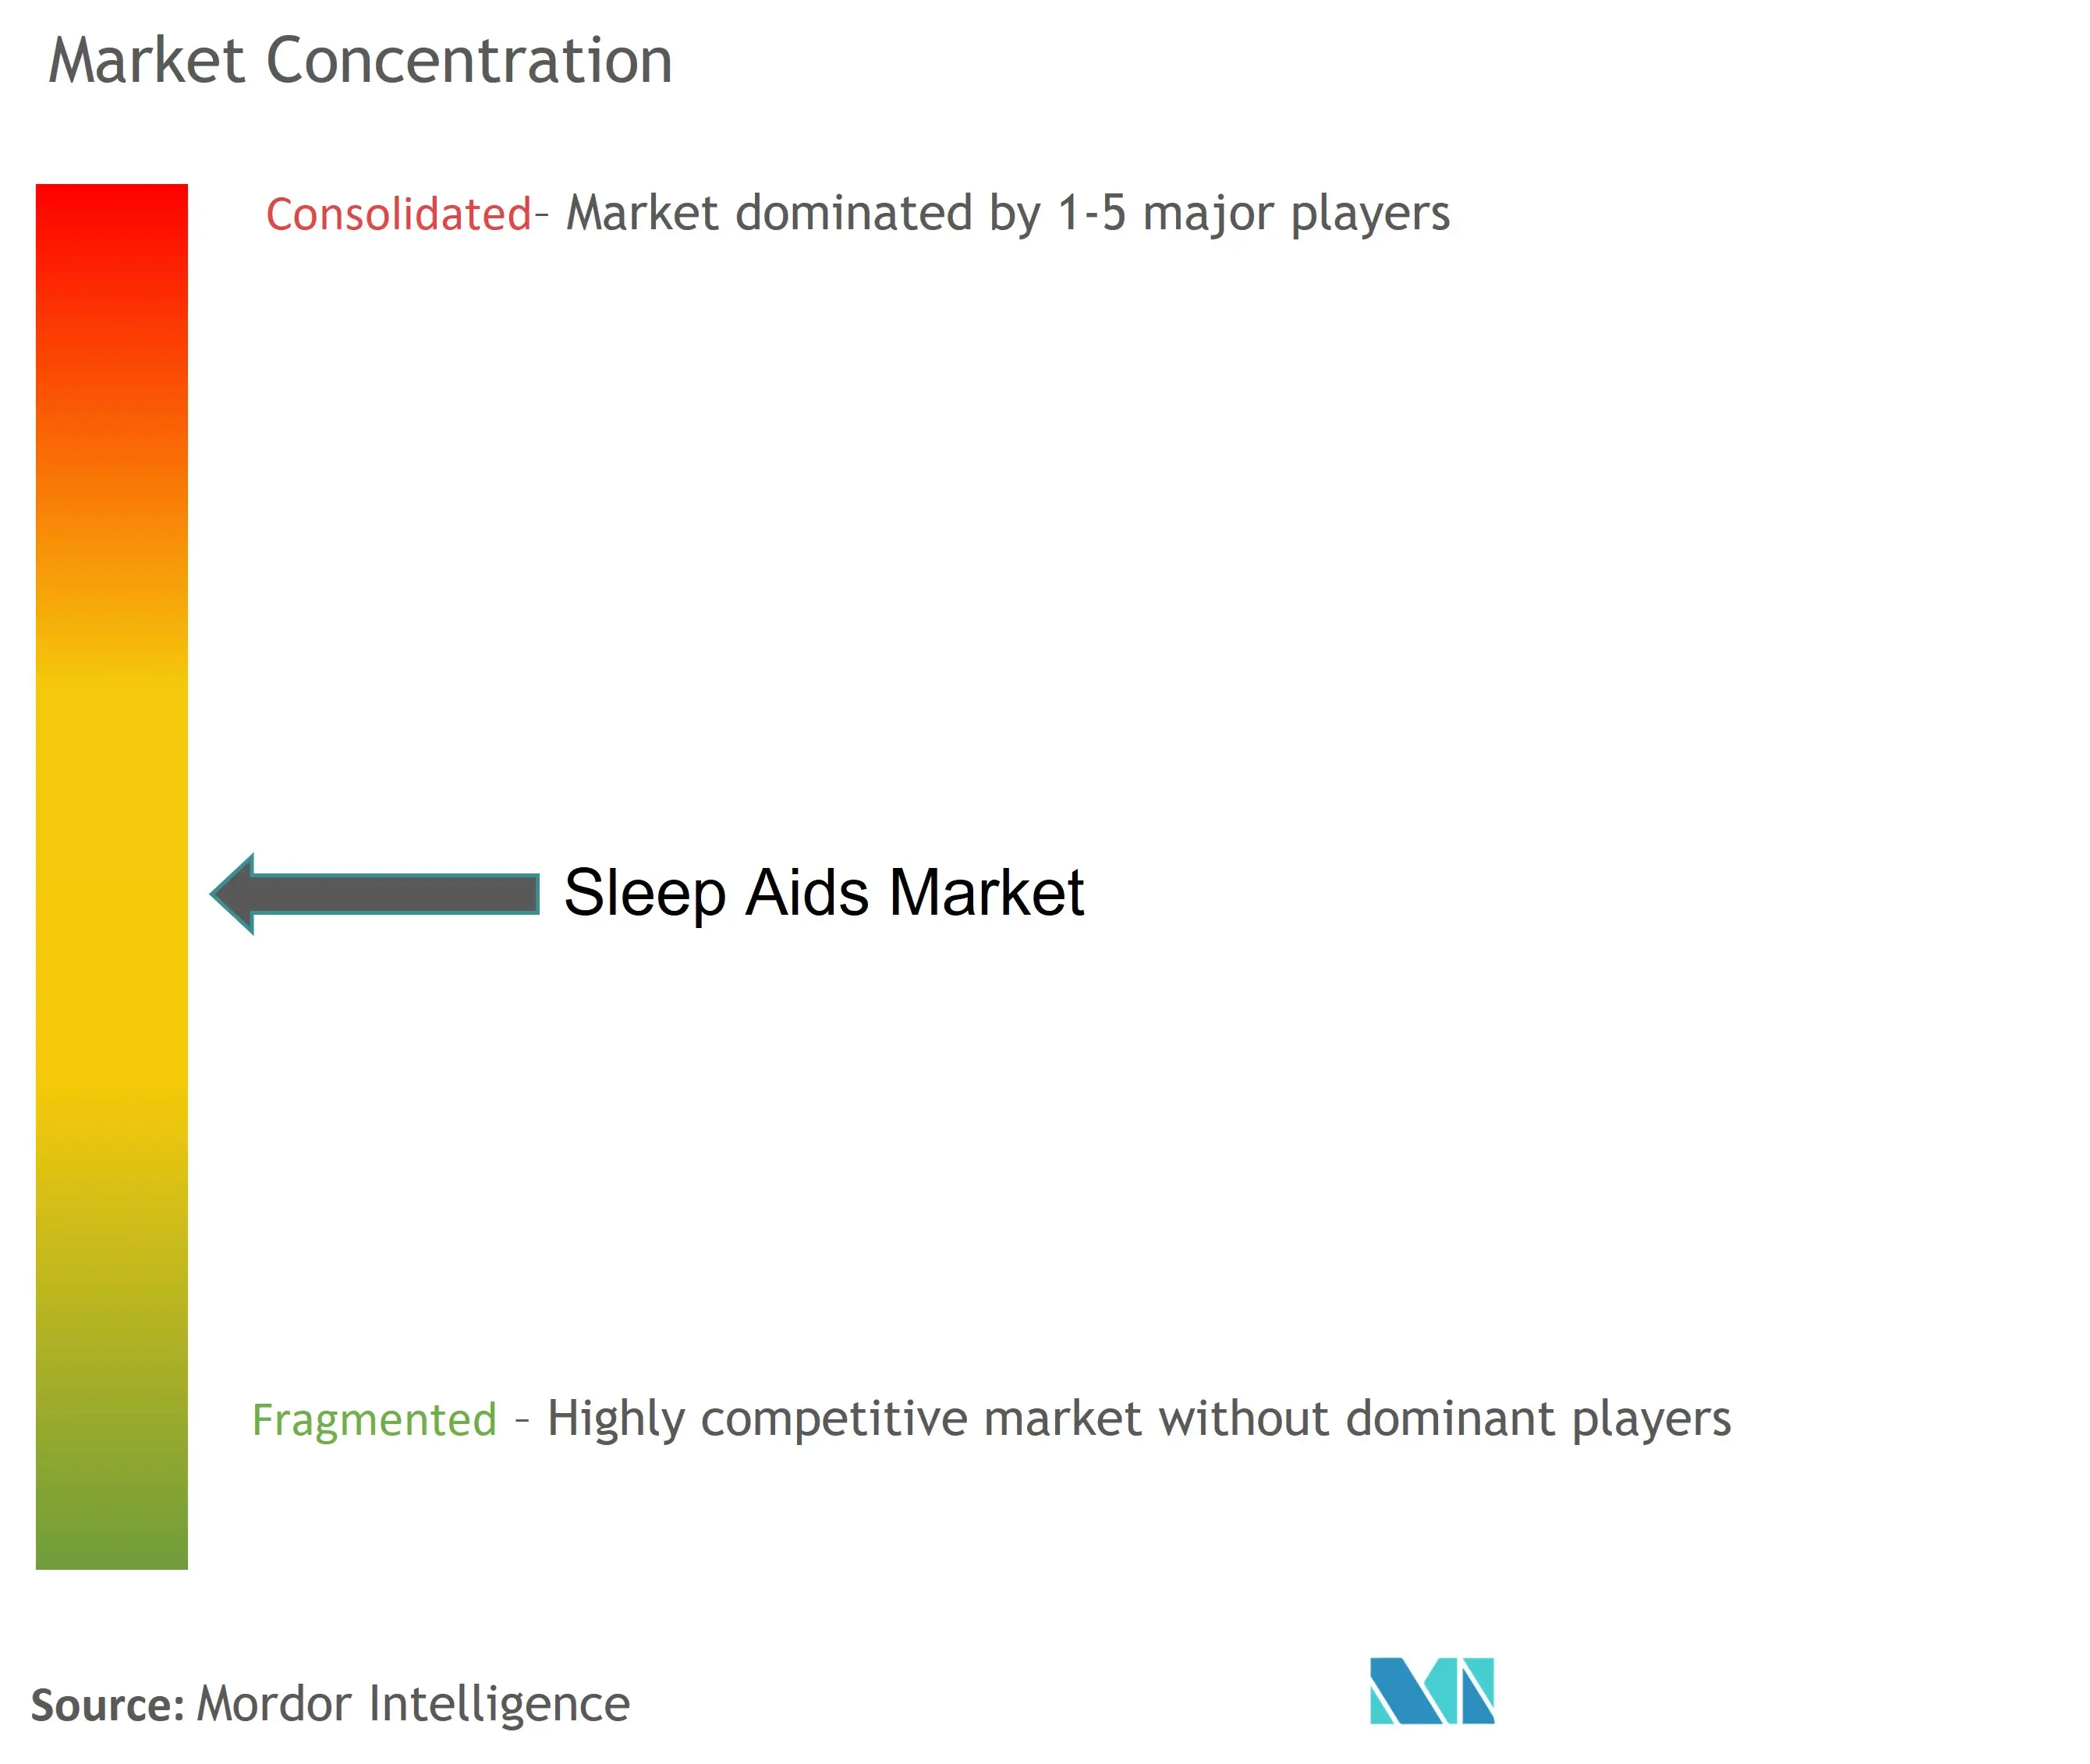 Sleep Aids Market Concentration